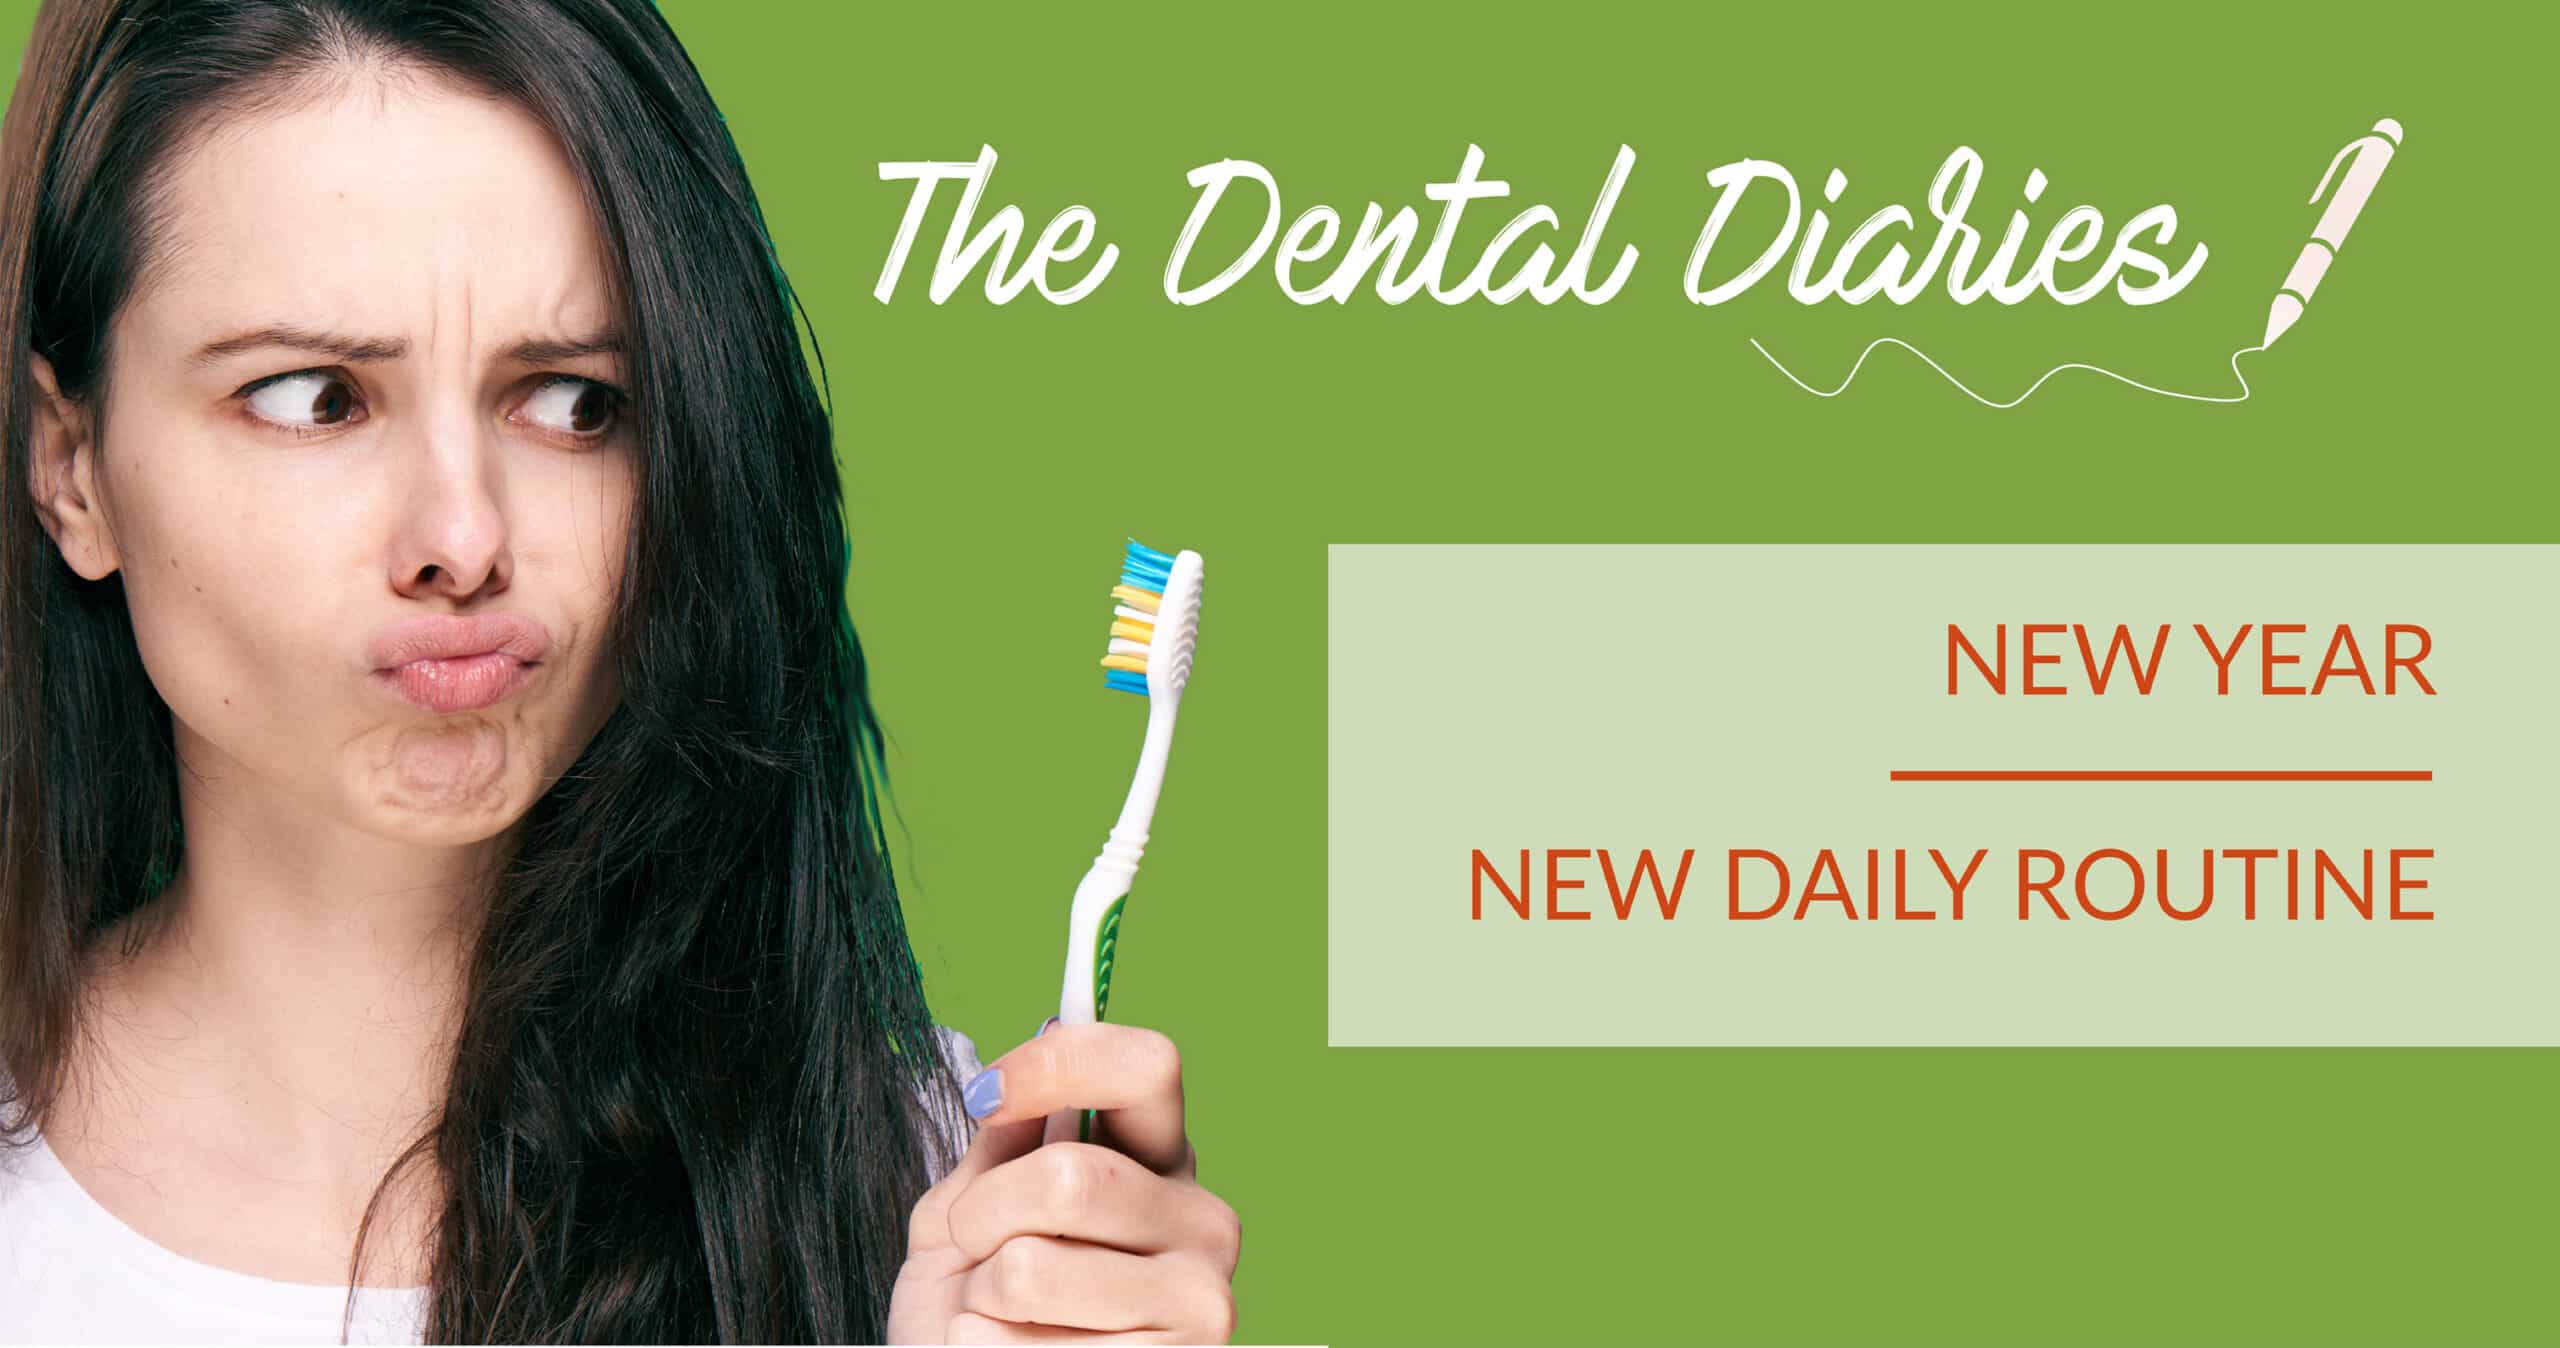 The Dental Diaries - new year new routine